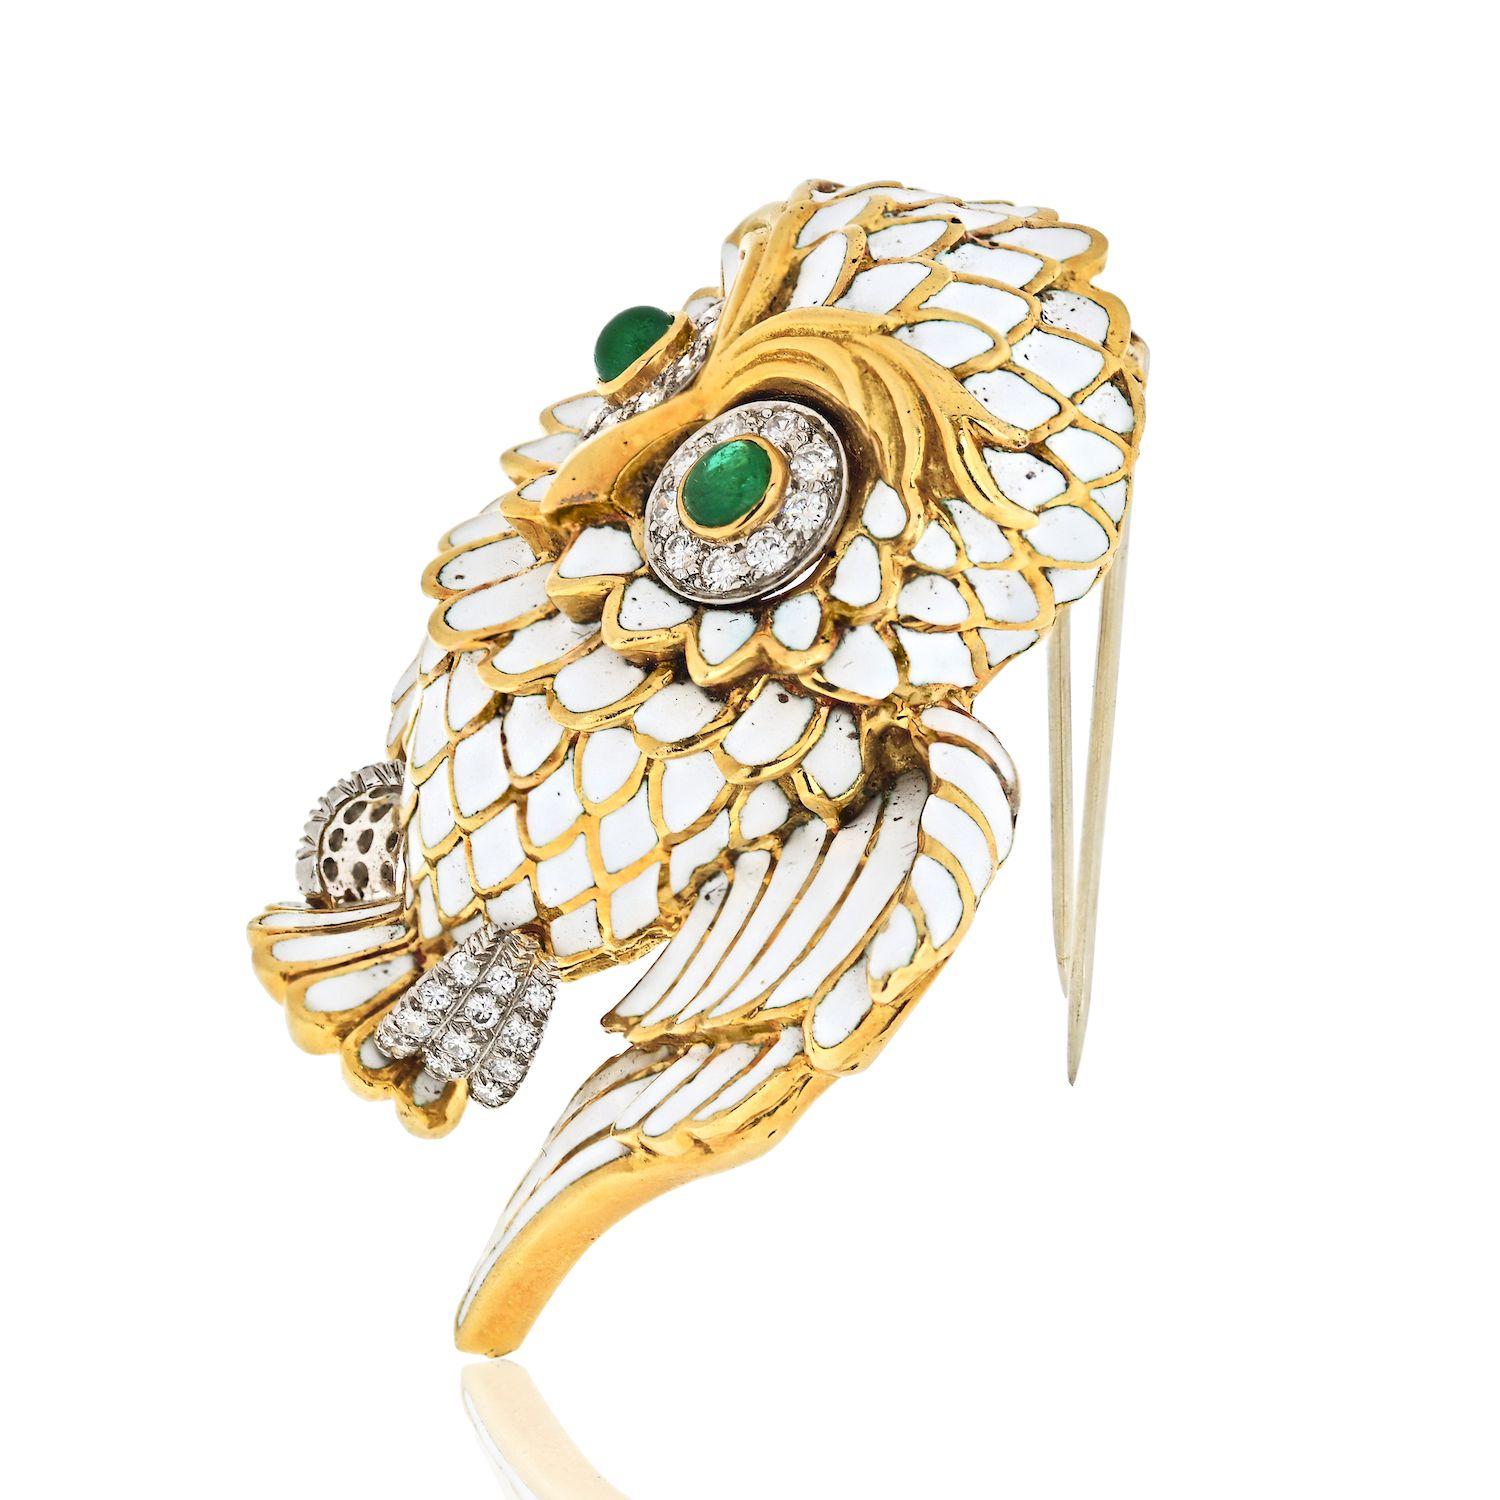 Fantastic owl brooch by David Webb made in 18K Yellow Gold, accented with green emerald eyes and diamonds. 

A David Webb owl brooch is somewhat delicate in the way they designed the wings. 

A very cute and even funny owl brooch, made in gold with